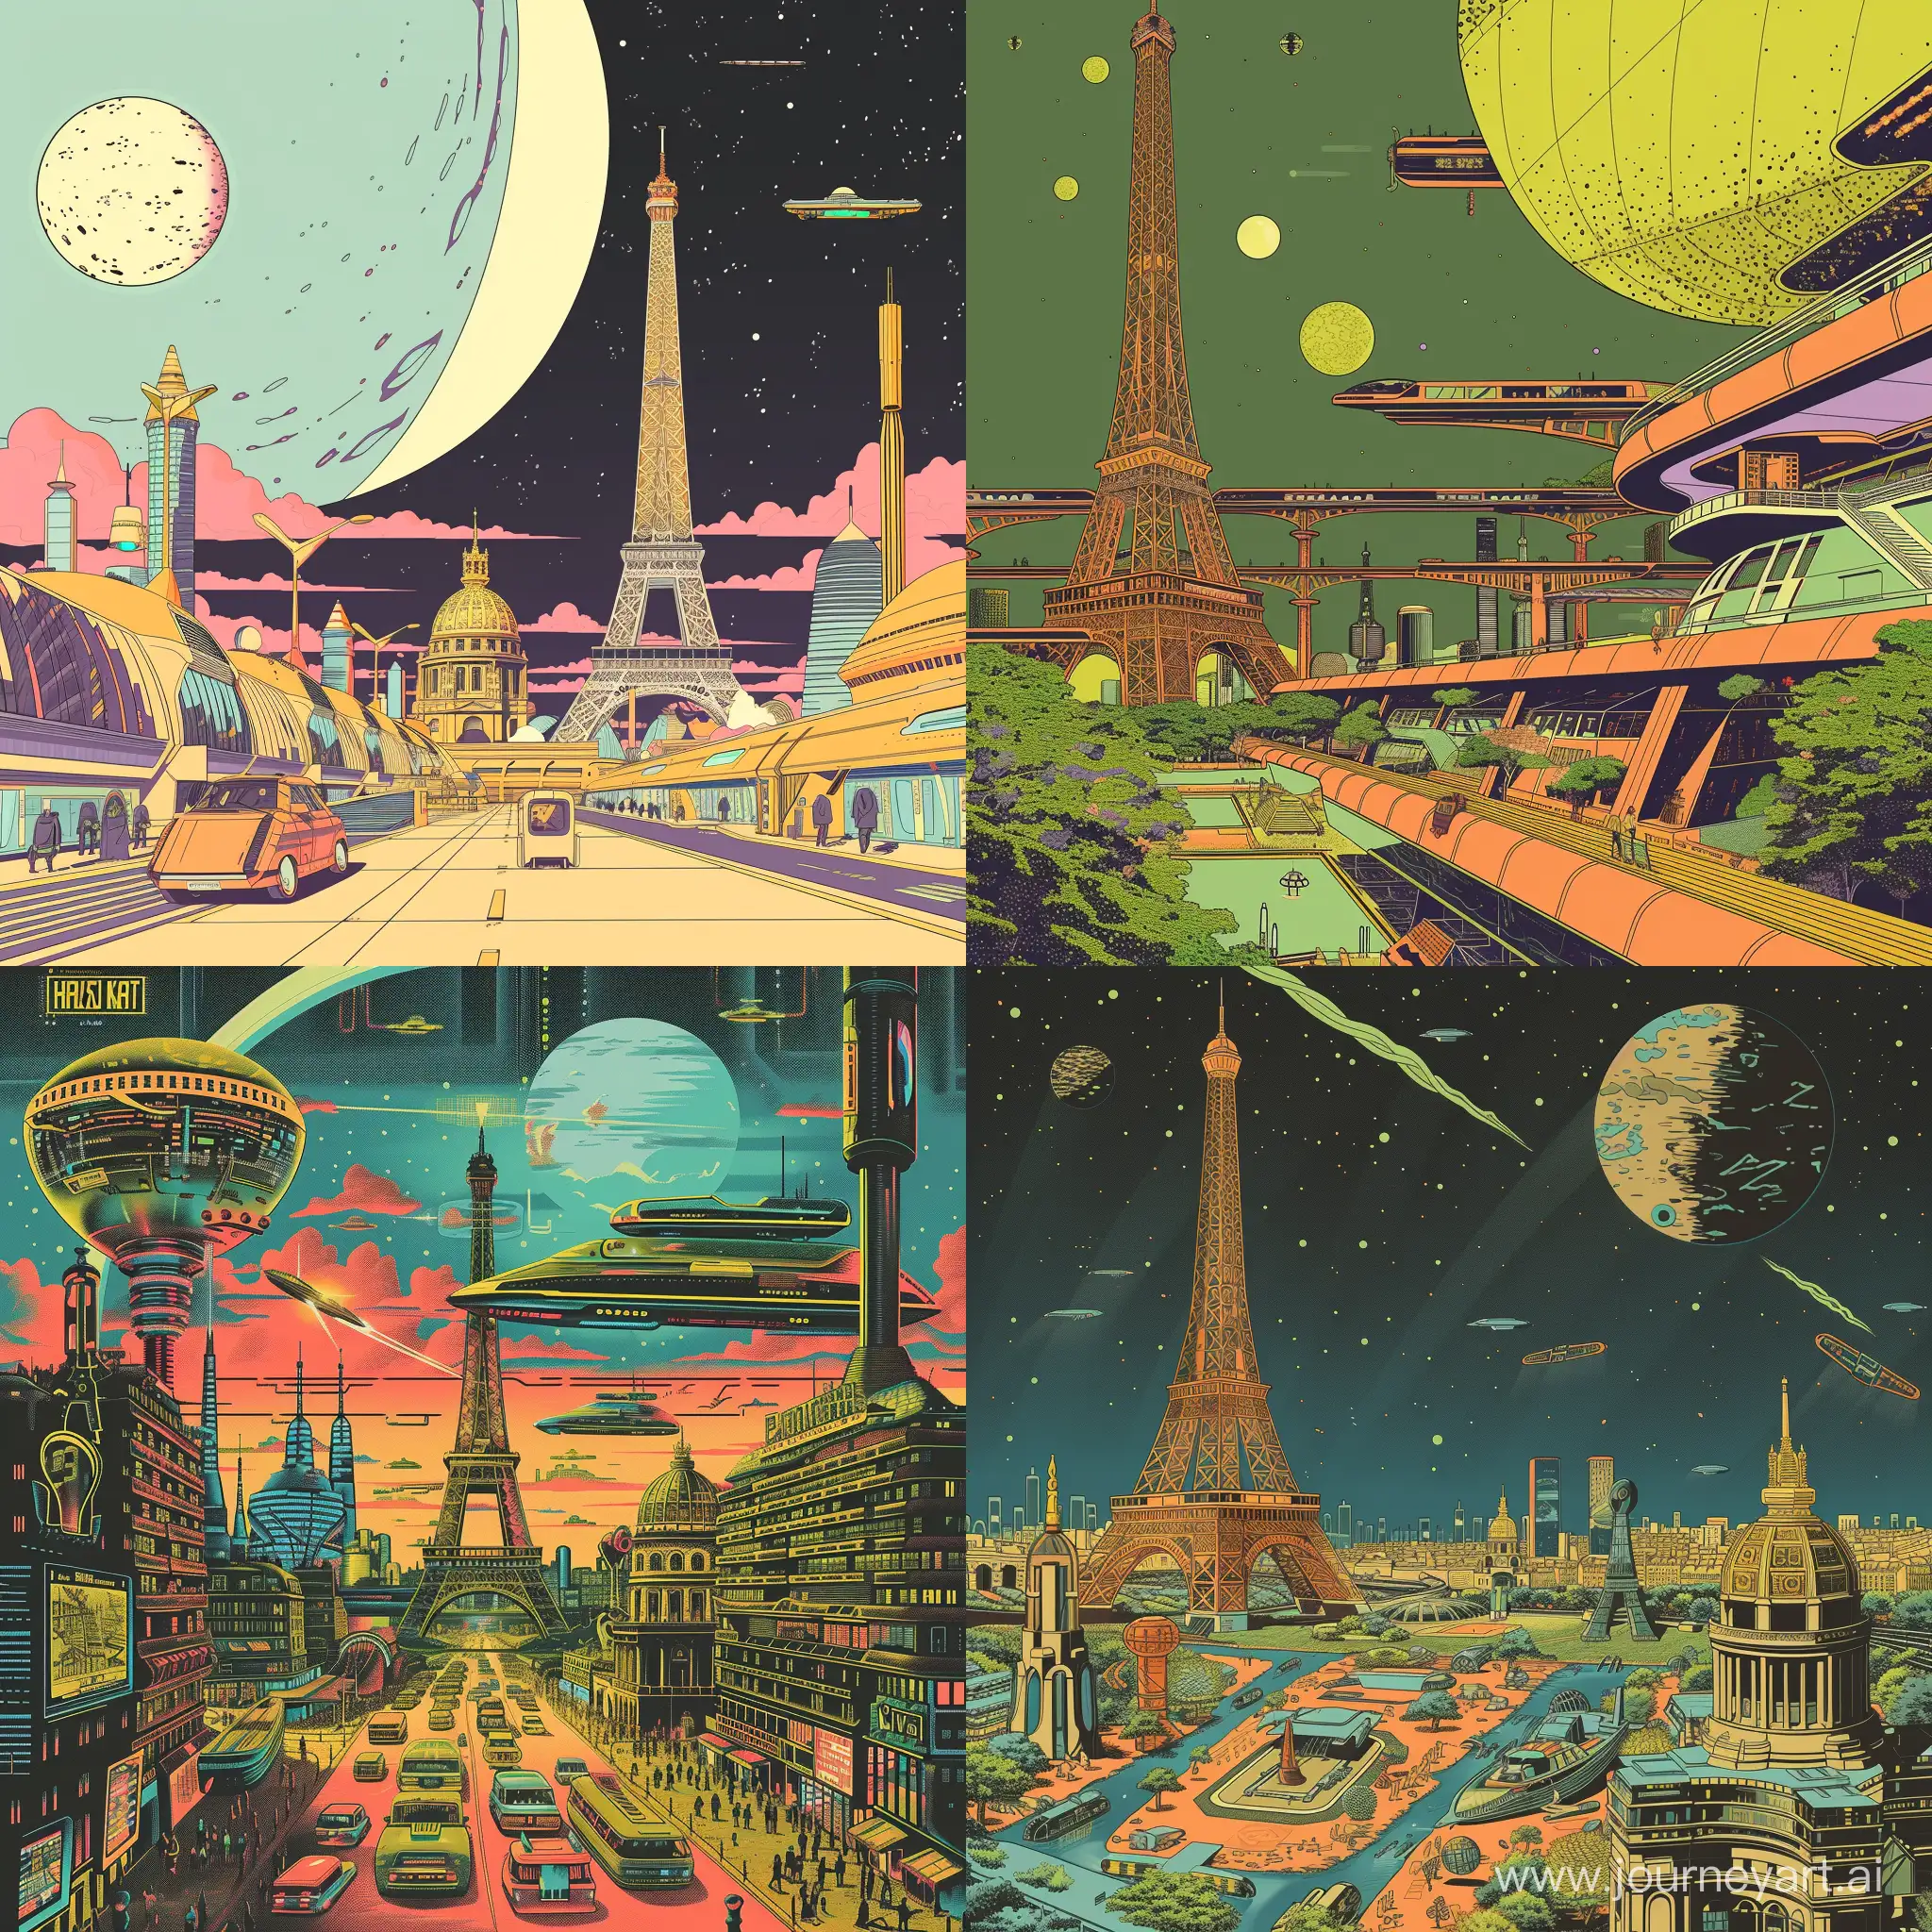 paris in the future, in a 70s sci-fi illustration style